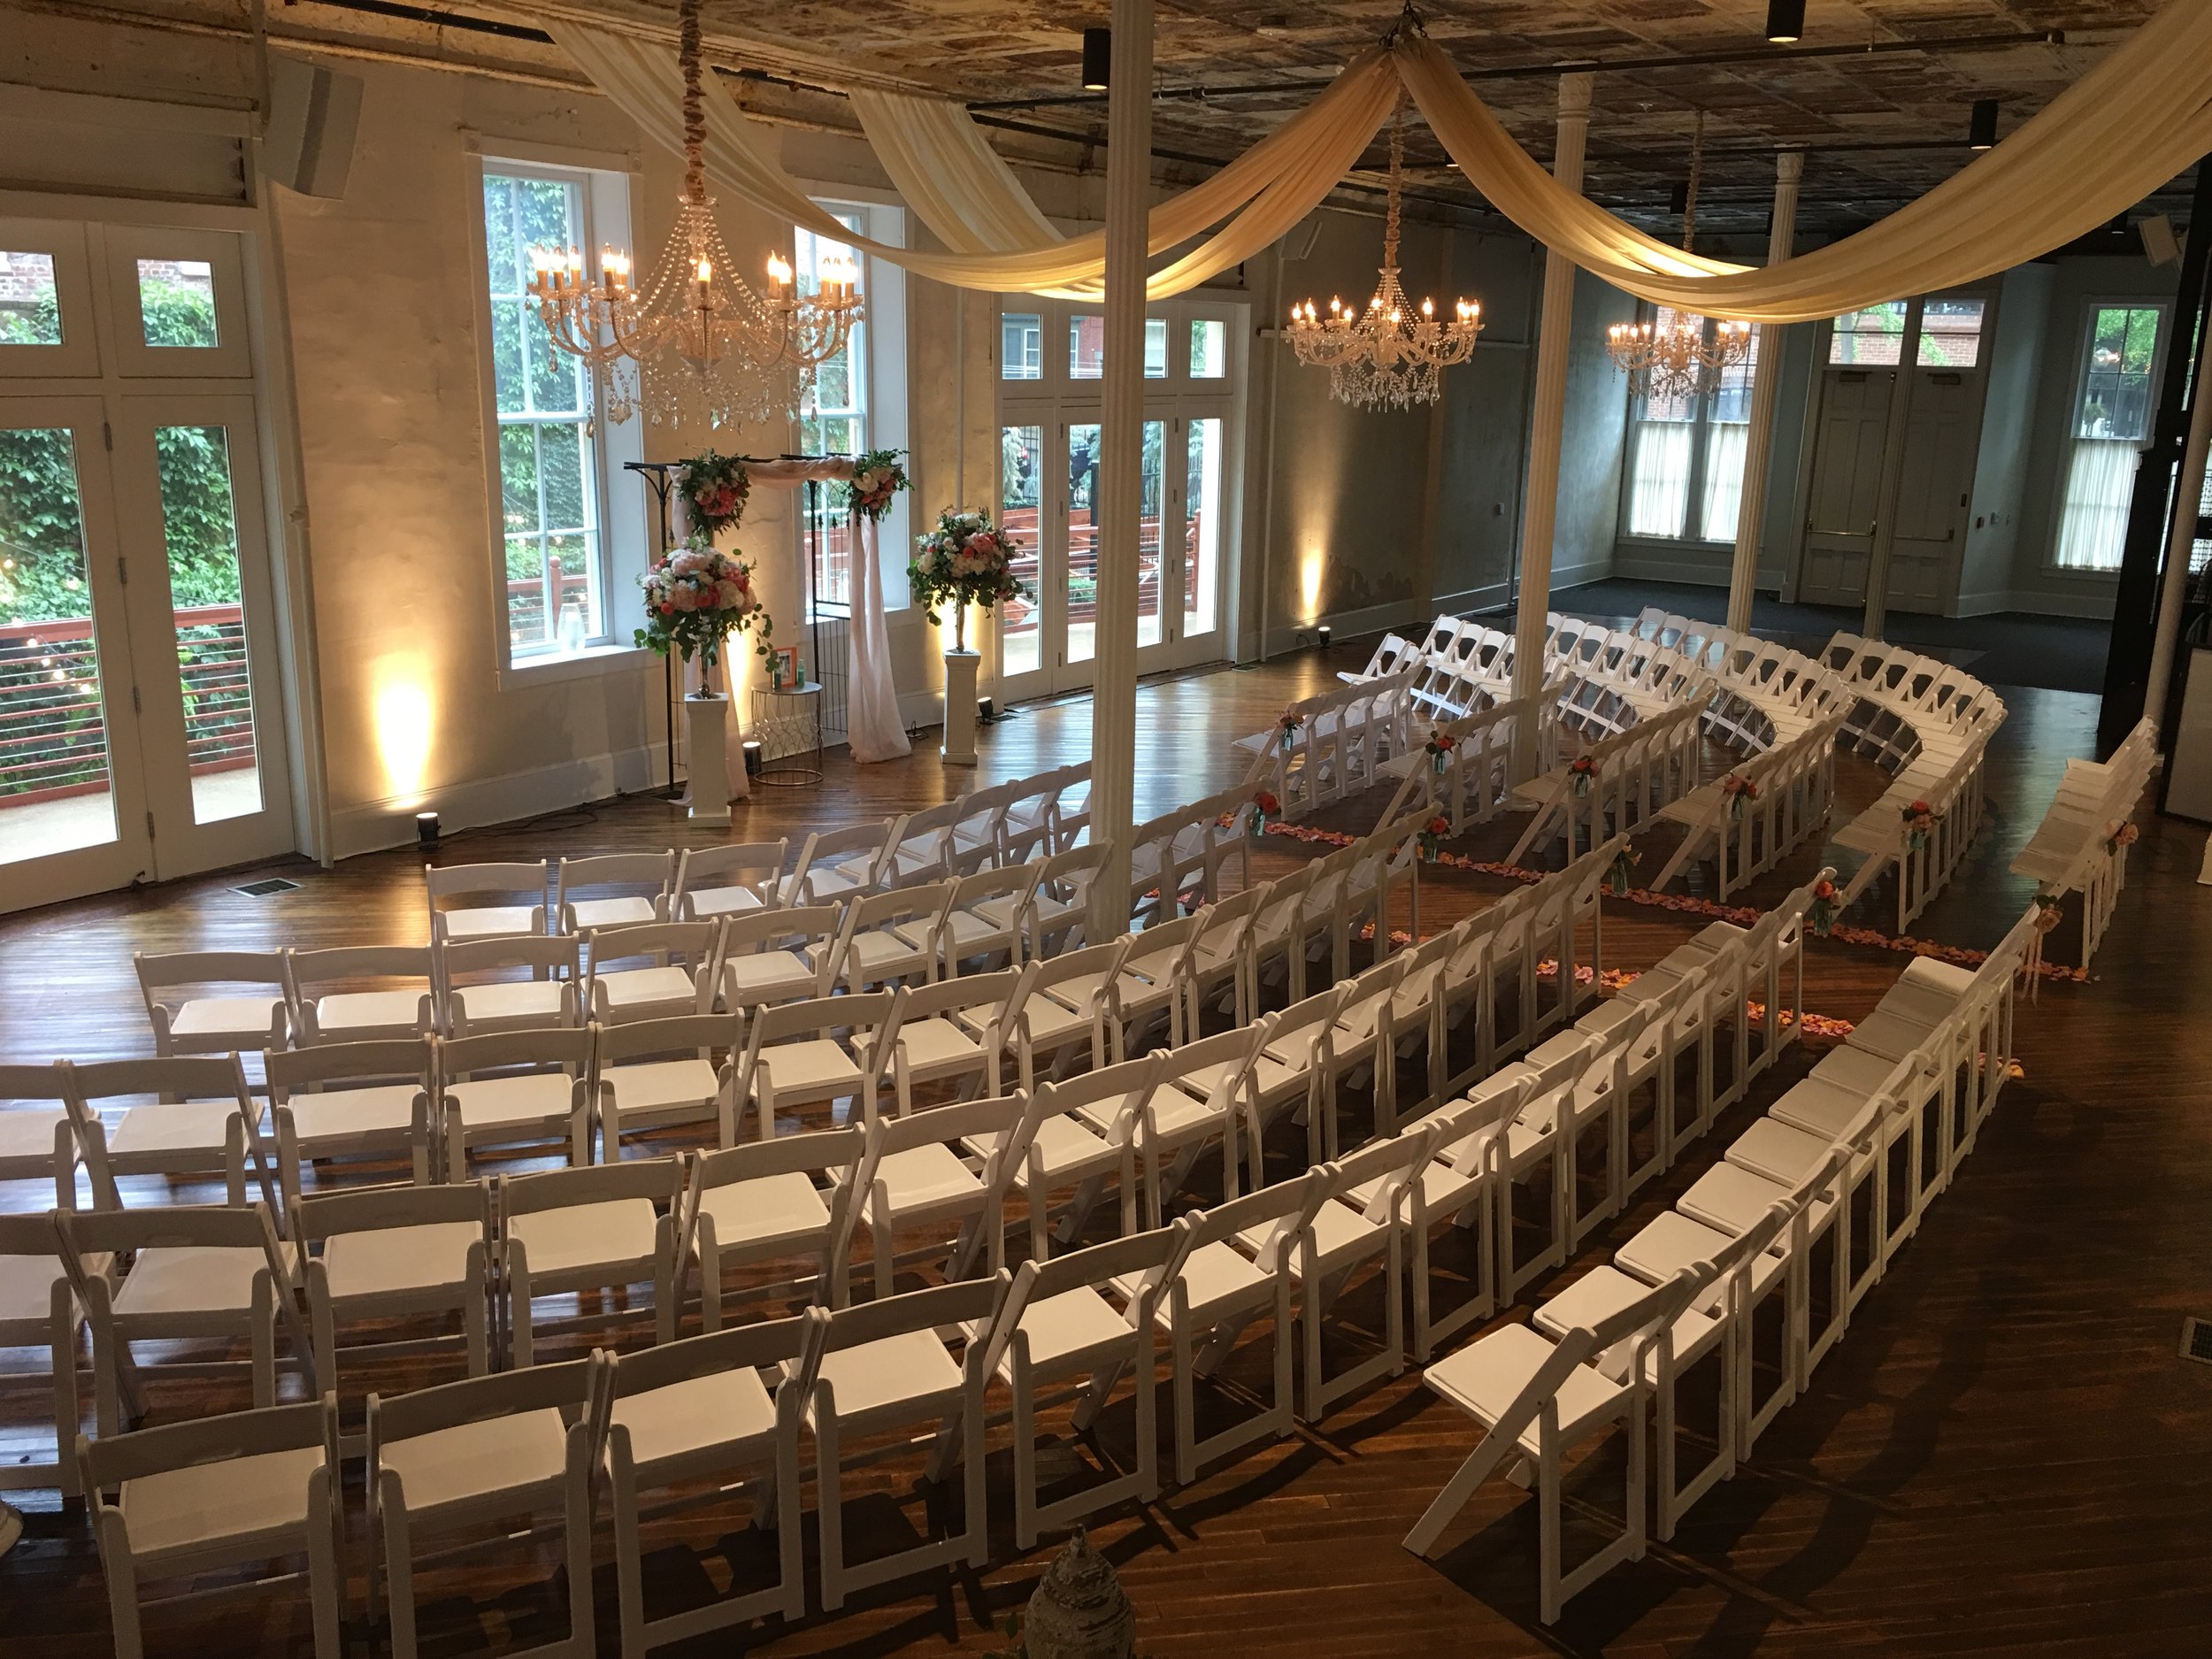 Grand Salon ceremony space set up white chairs uplighting